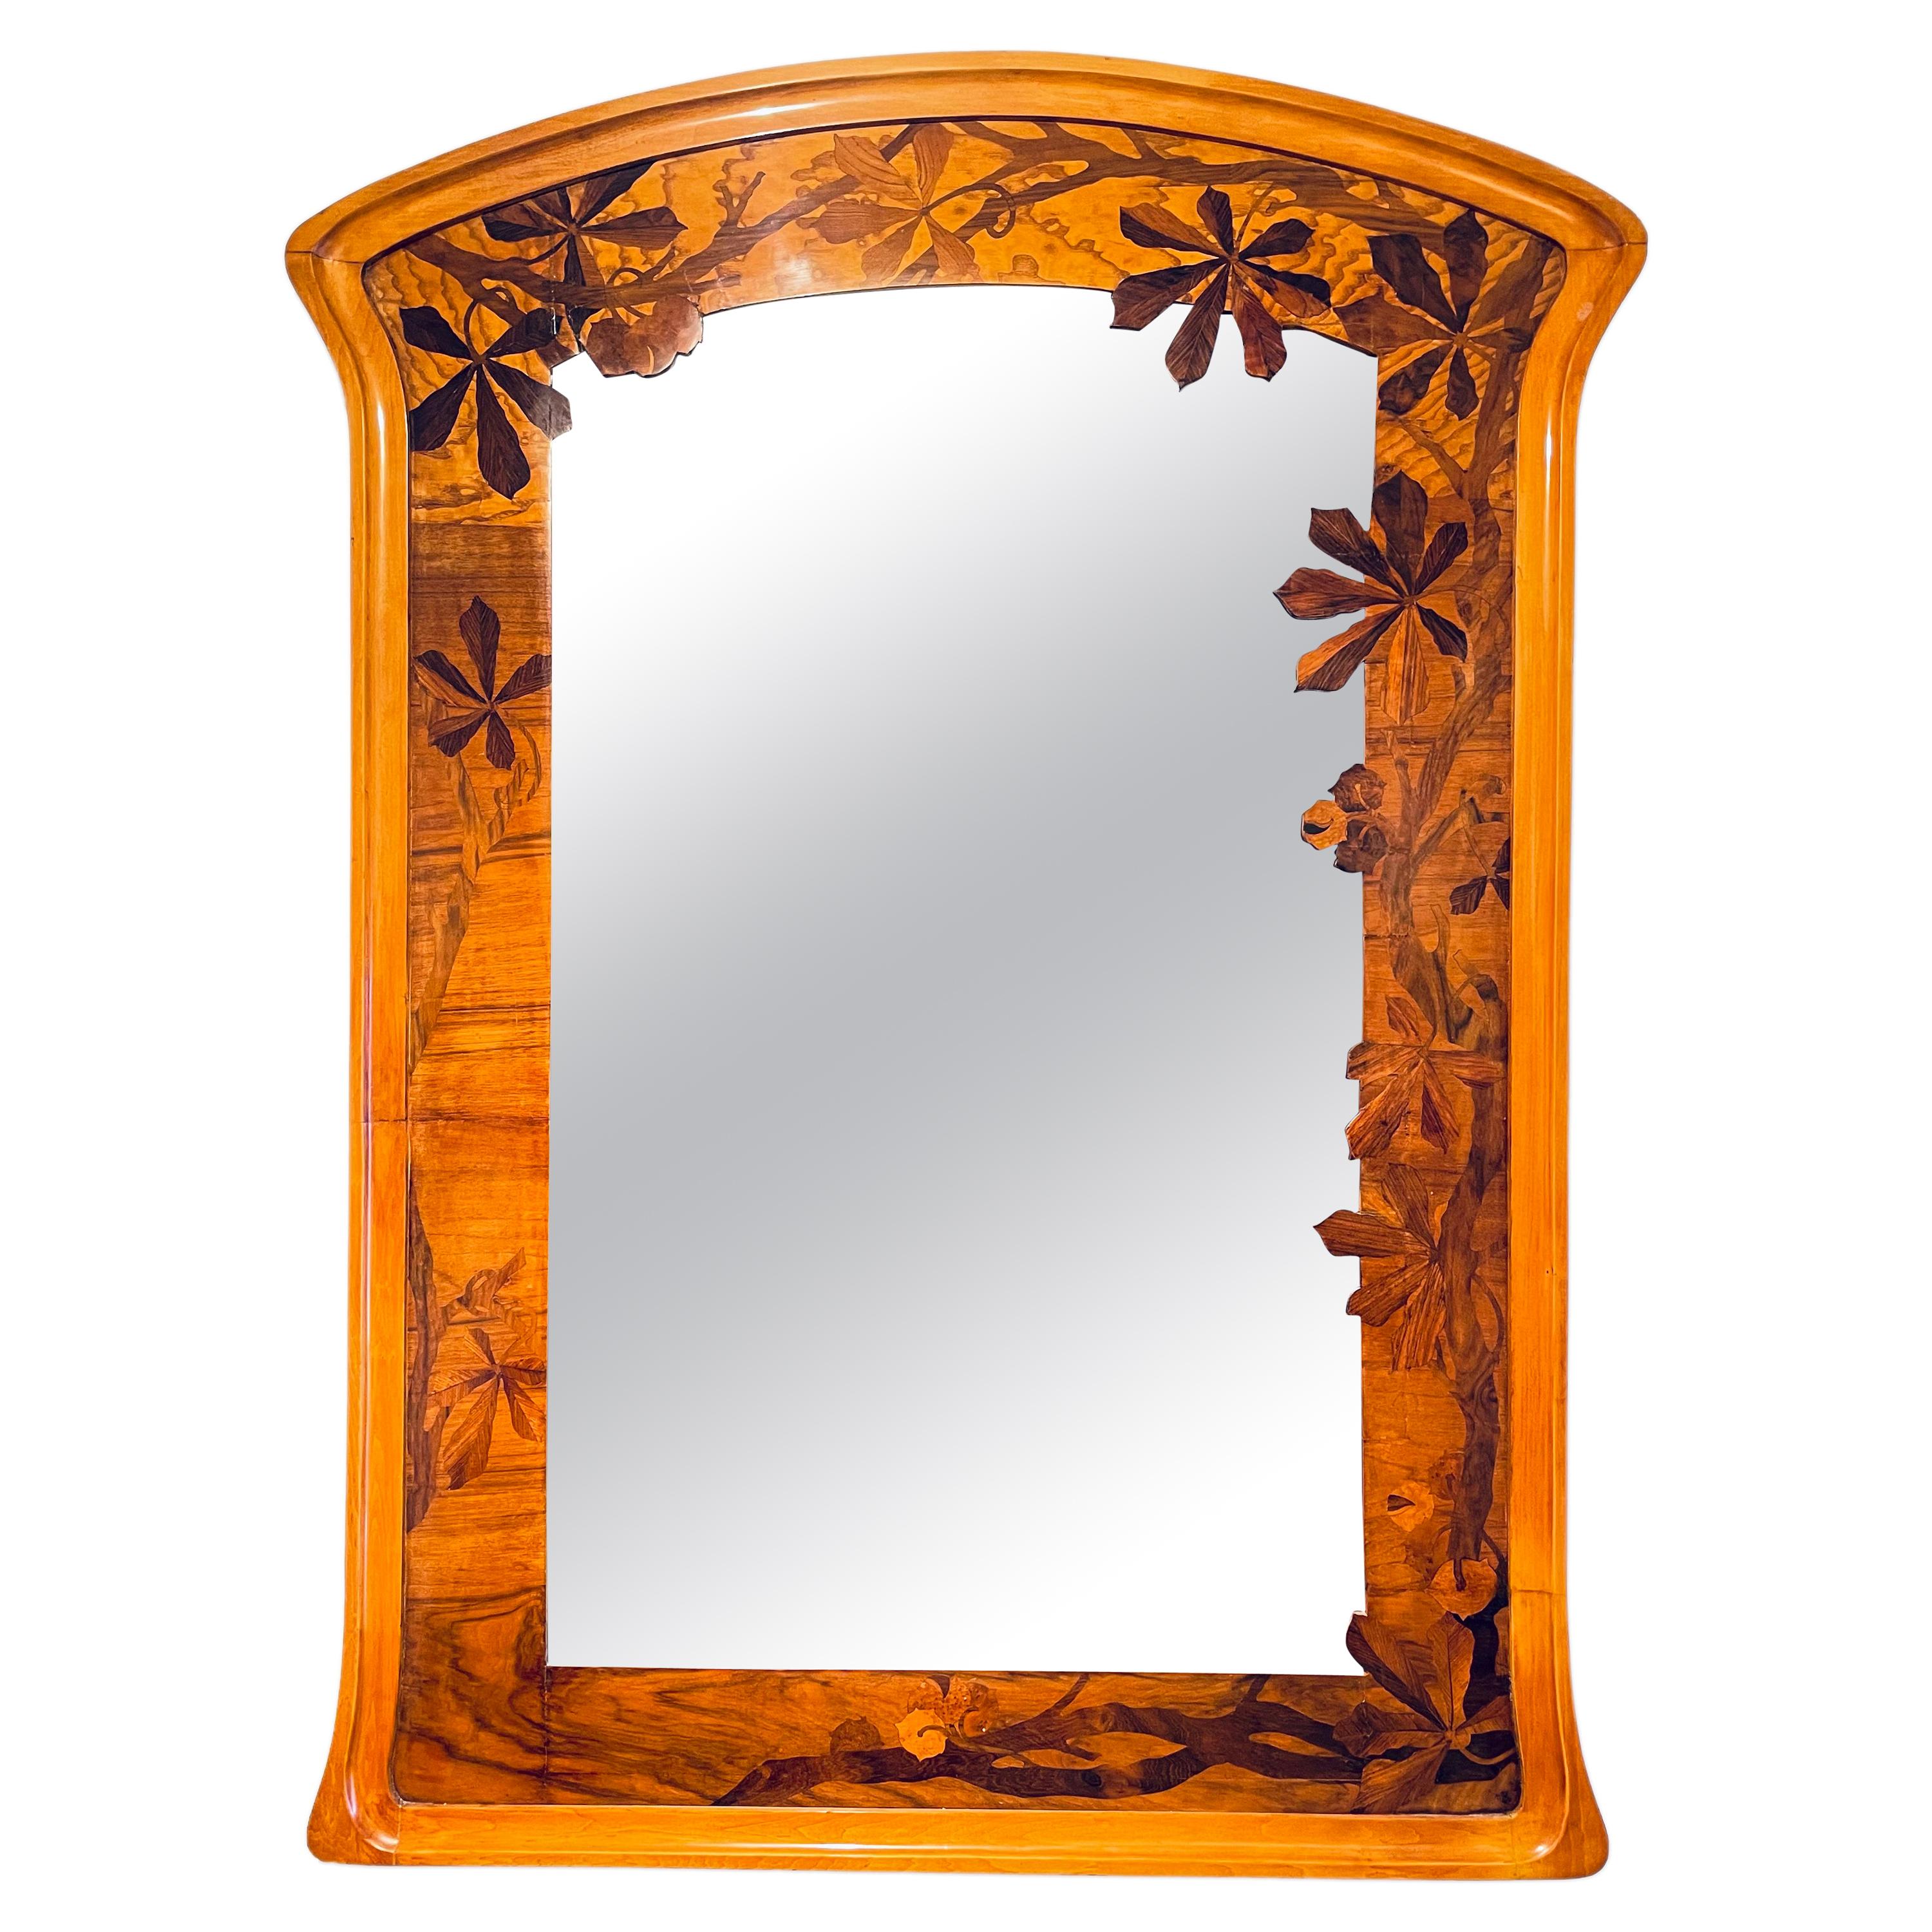 Early 20th Century French Art Nouveau Marquetry Wall Mirror by, Louis Majorelle